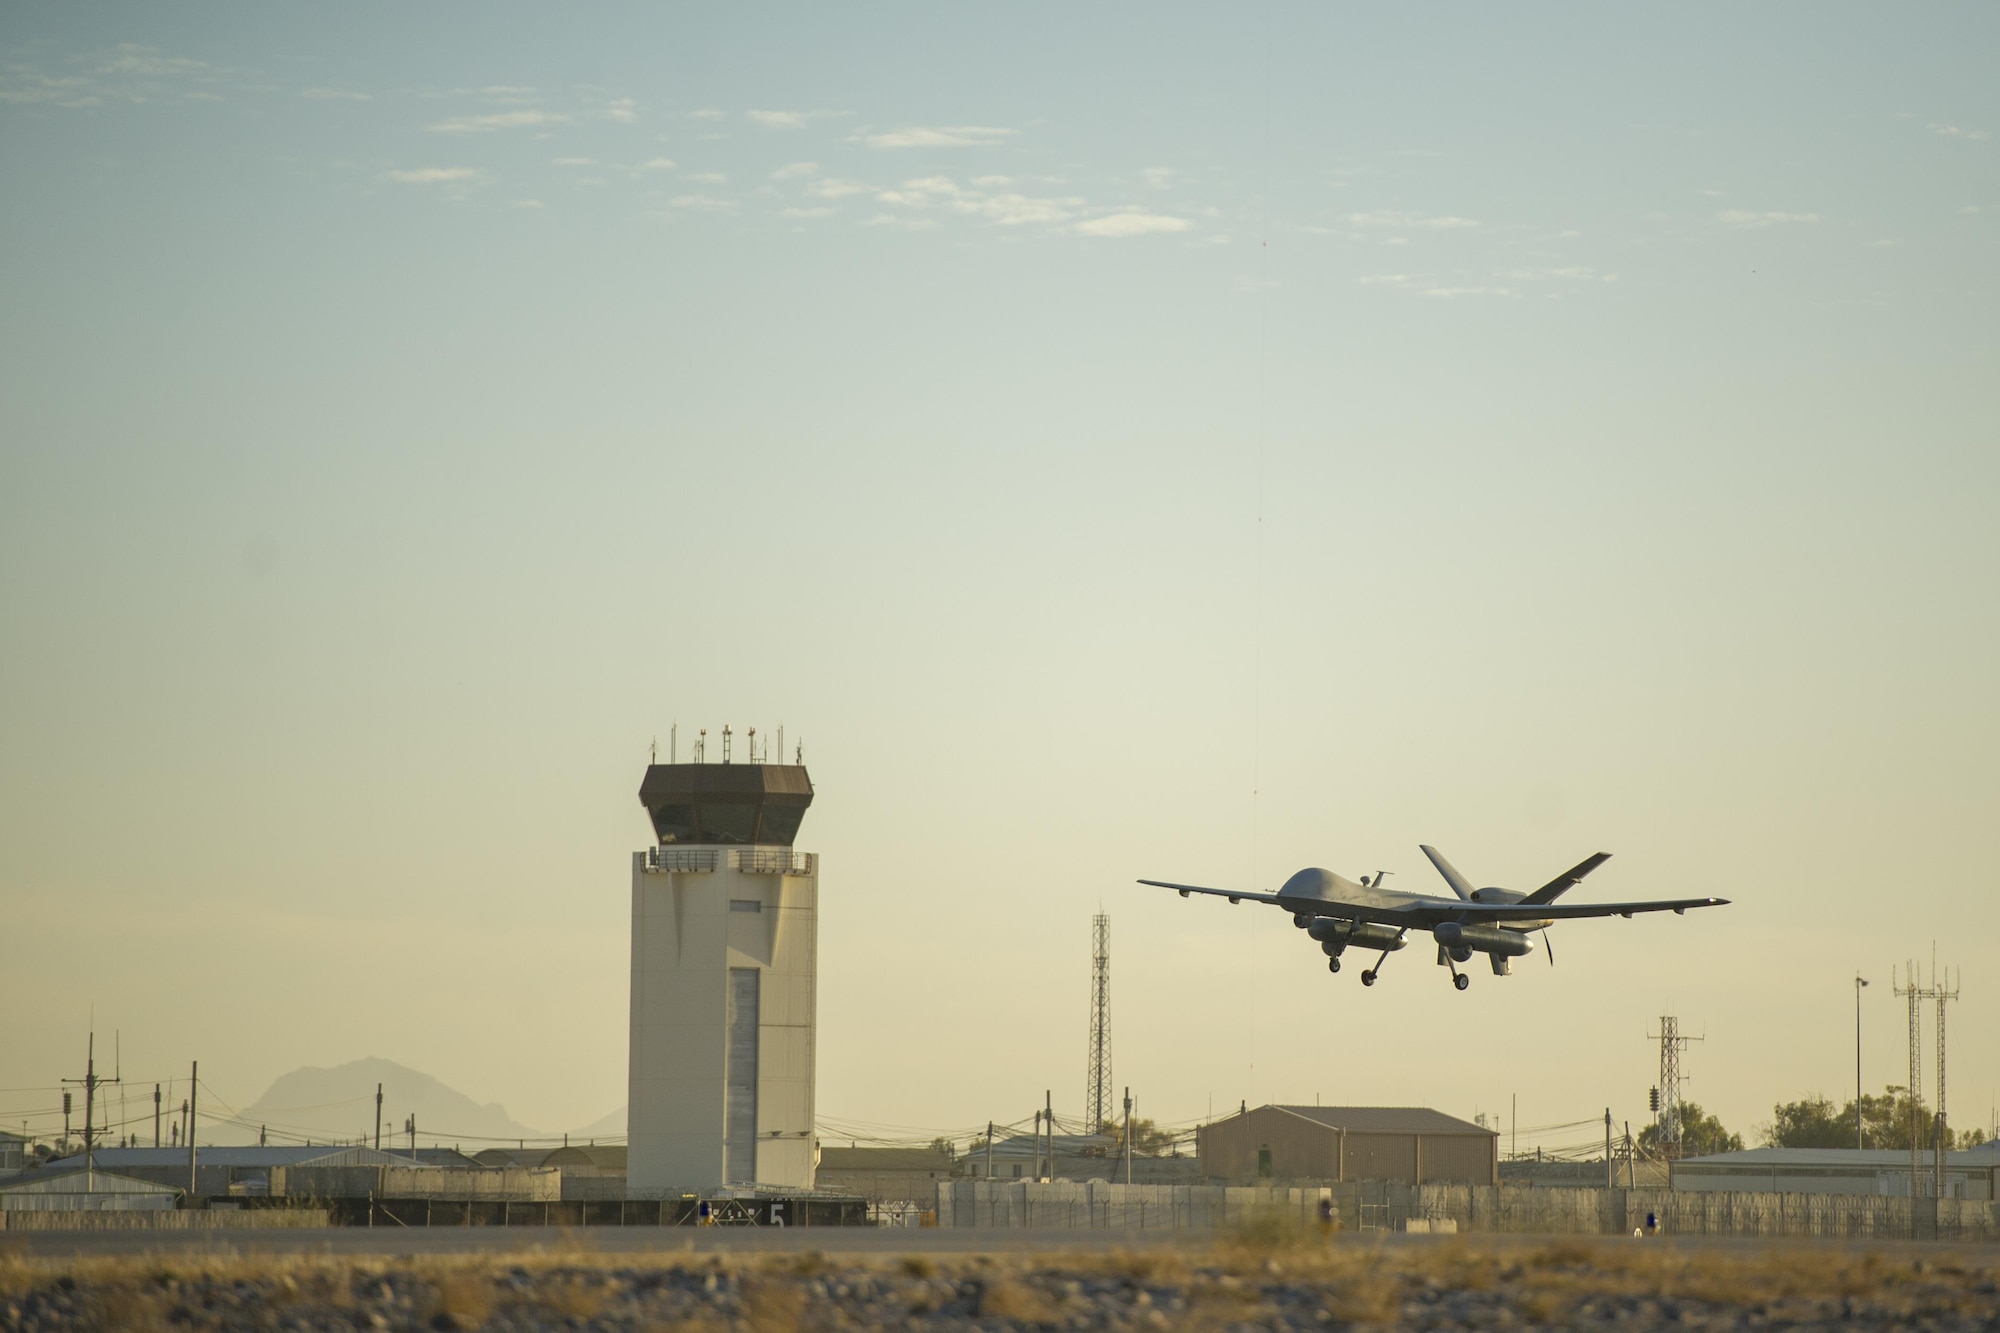 An MQ-9 Reaper equipped with Gorgon Stare from the 62nd Expeditionary Reconnaissance Squadron takes off at Kandahar Airfield, Afghanistan, Dec. 5, 2015. The capability combines real-time situational awareness for strike coordination and reconnaissance, or cross-cueing other sensors, with persistent video recording for forensic analysis and pattern-of-life study. (U.S. Air Force photo by Tech. Sgt. Robert Cloys/Released)